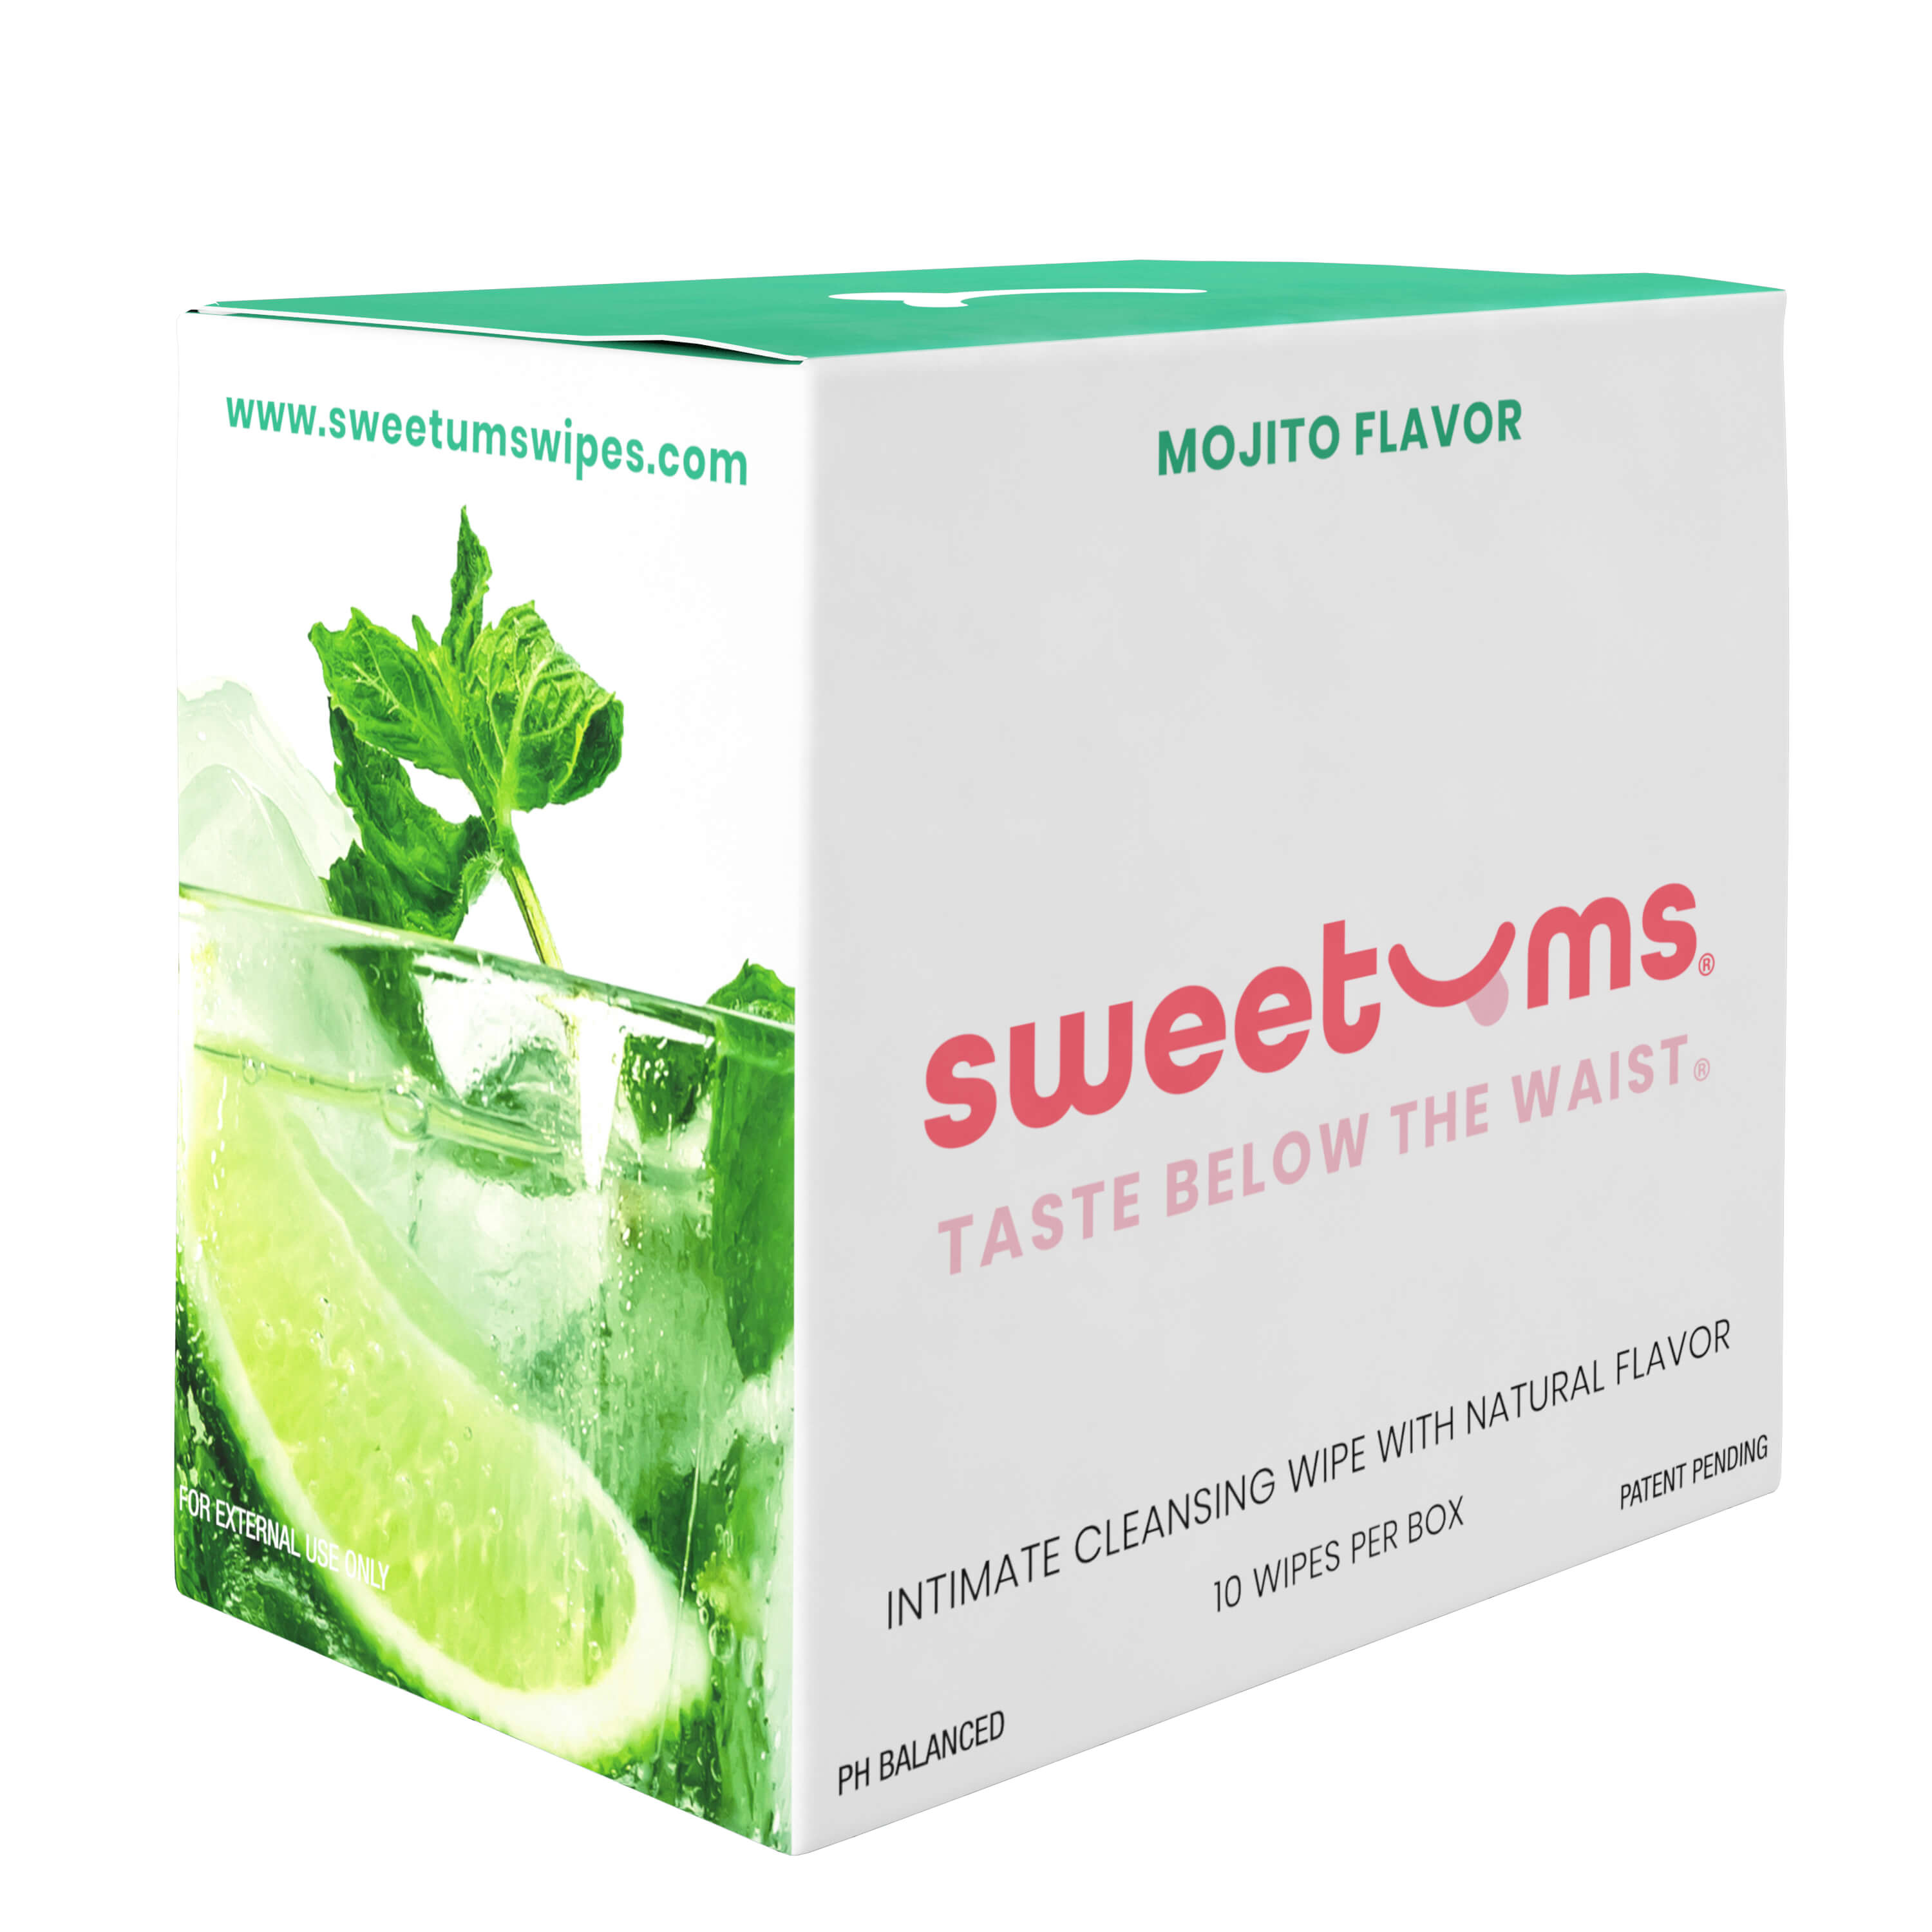 Sweetums Flavored Feminine intimate wipes - Mojito Box of 10